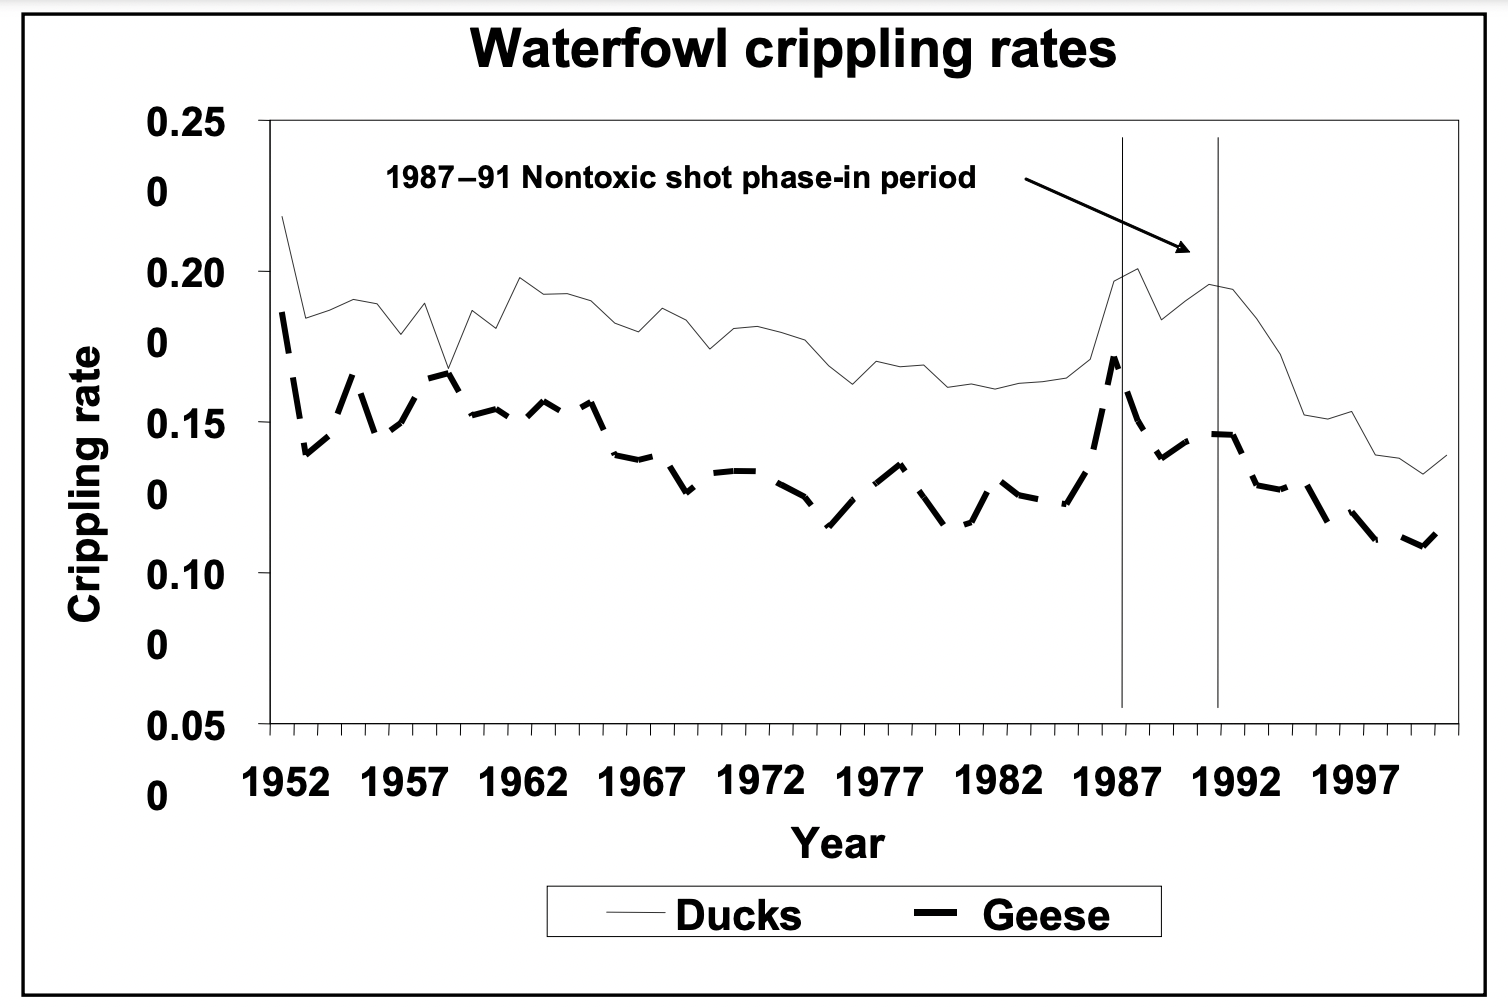 Waterfowl crippling rates from 1952 to 1997.